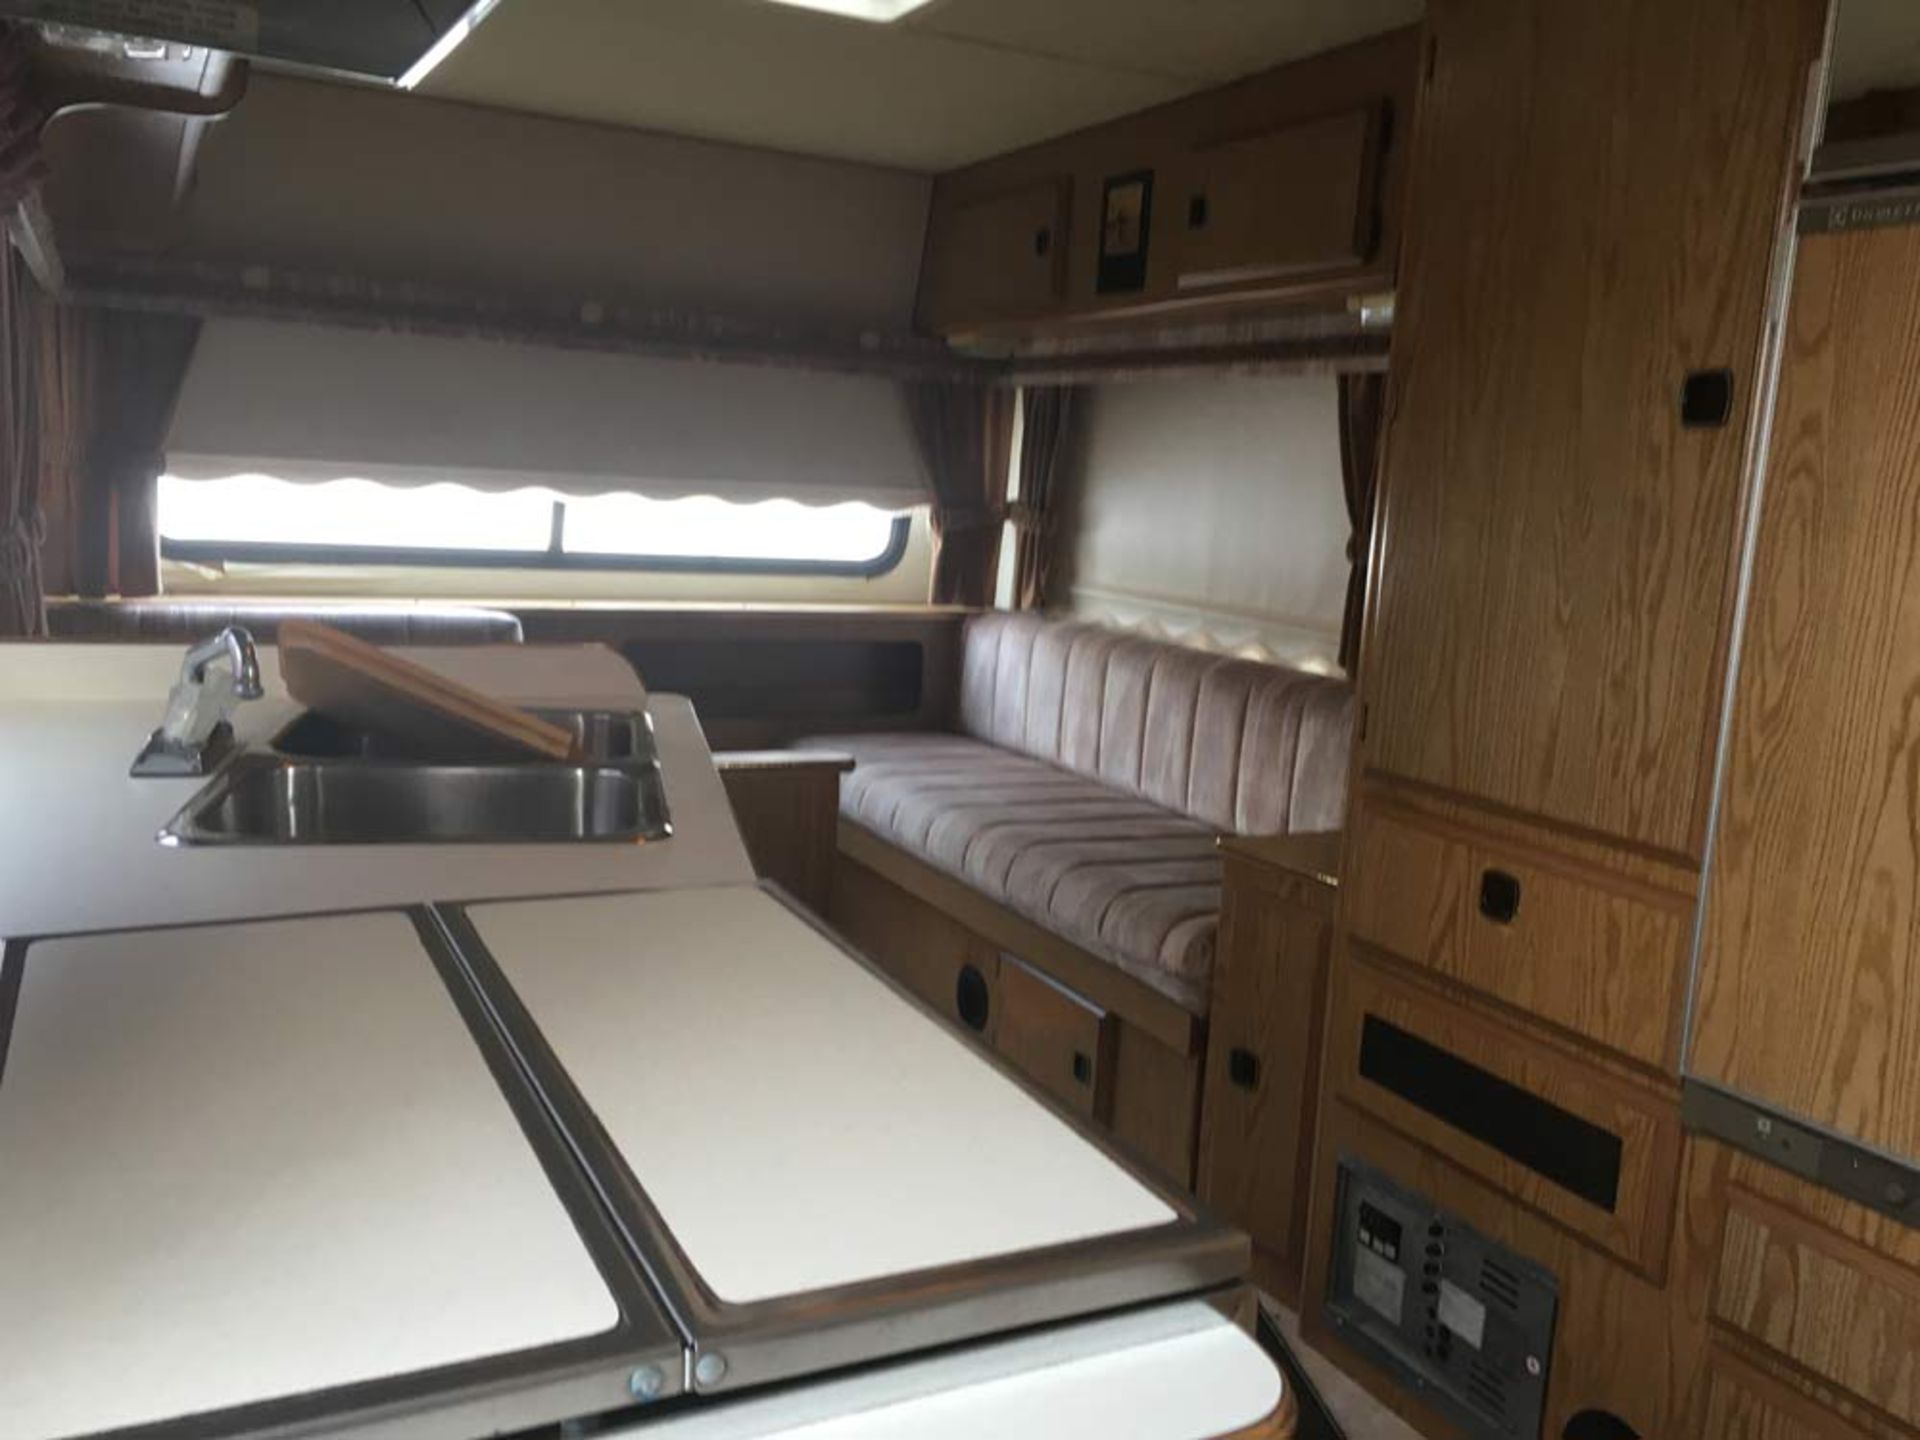 1989 5th Wheel T/A Travel Trailer - Image 5 of 5